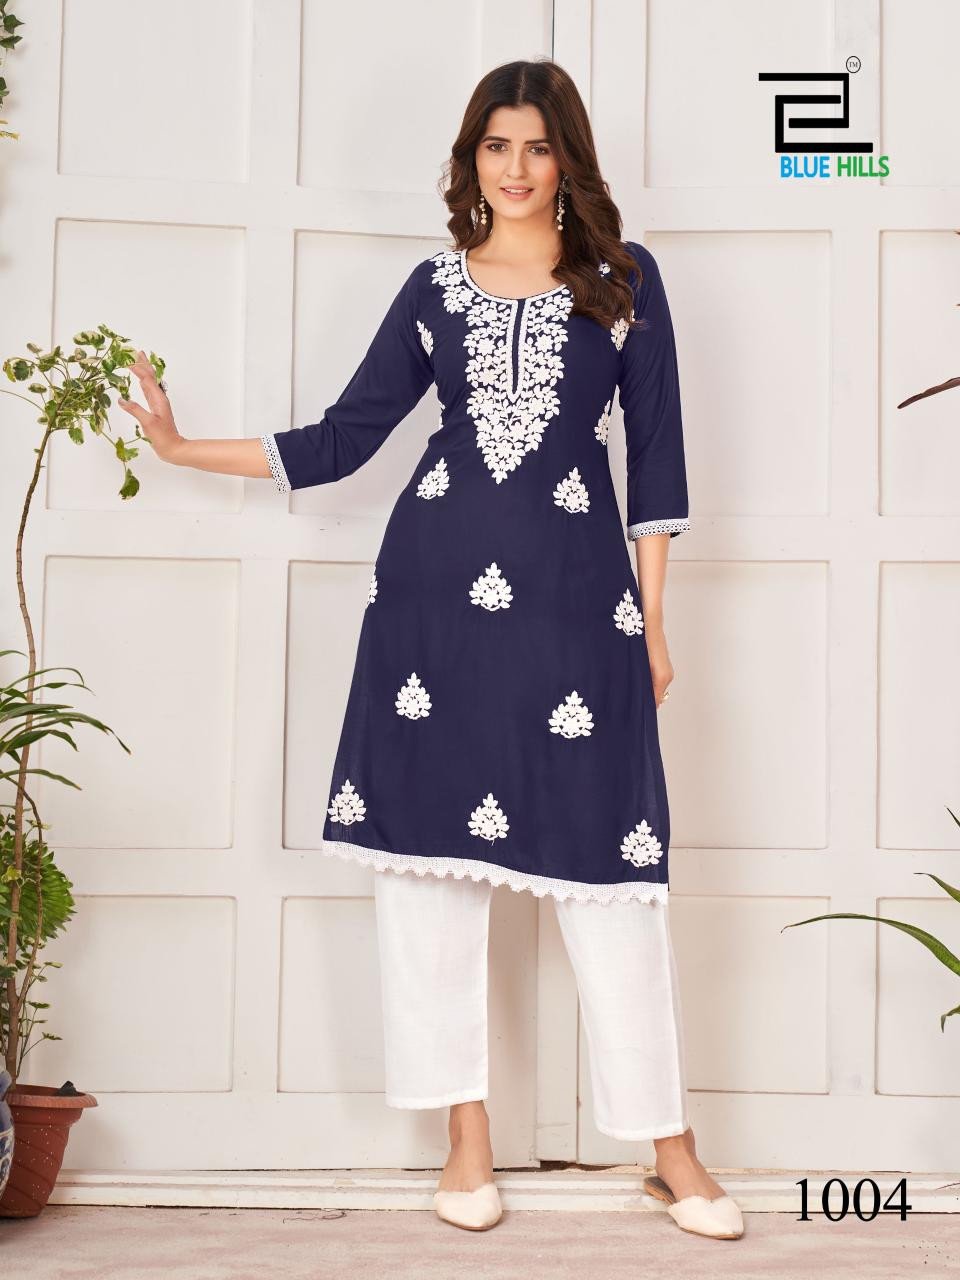 Ivory White Pearl Lucknowi Chikan Work Suit. – Dress365days